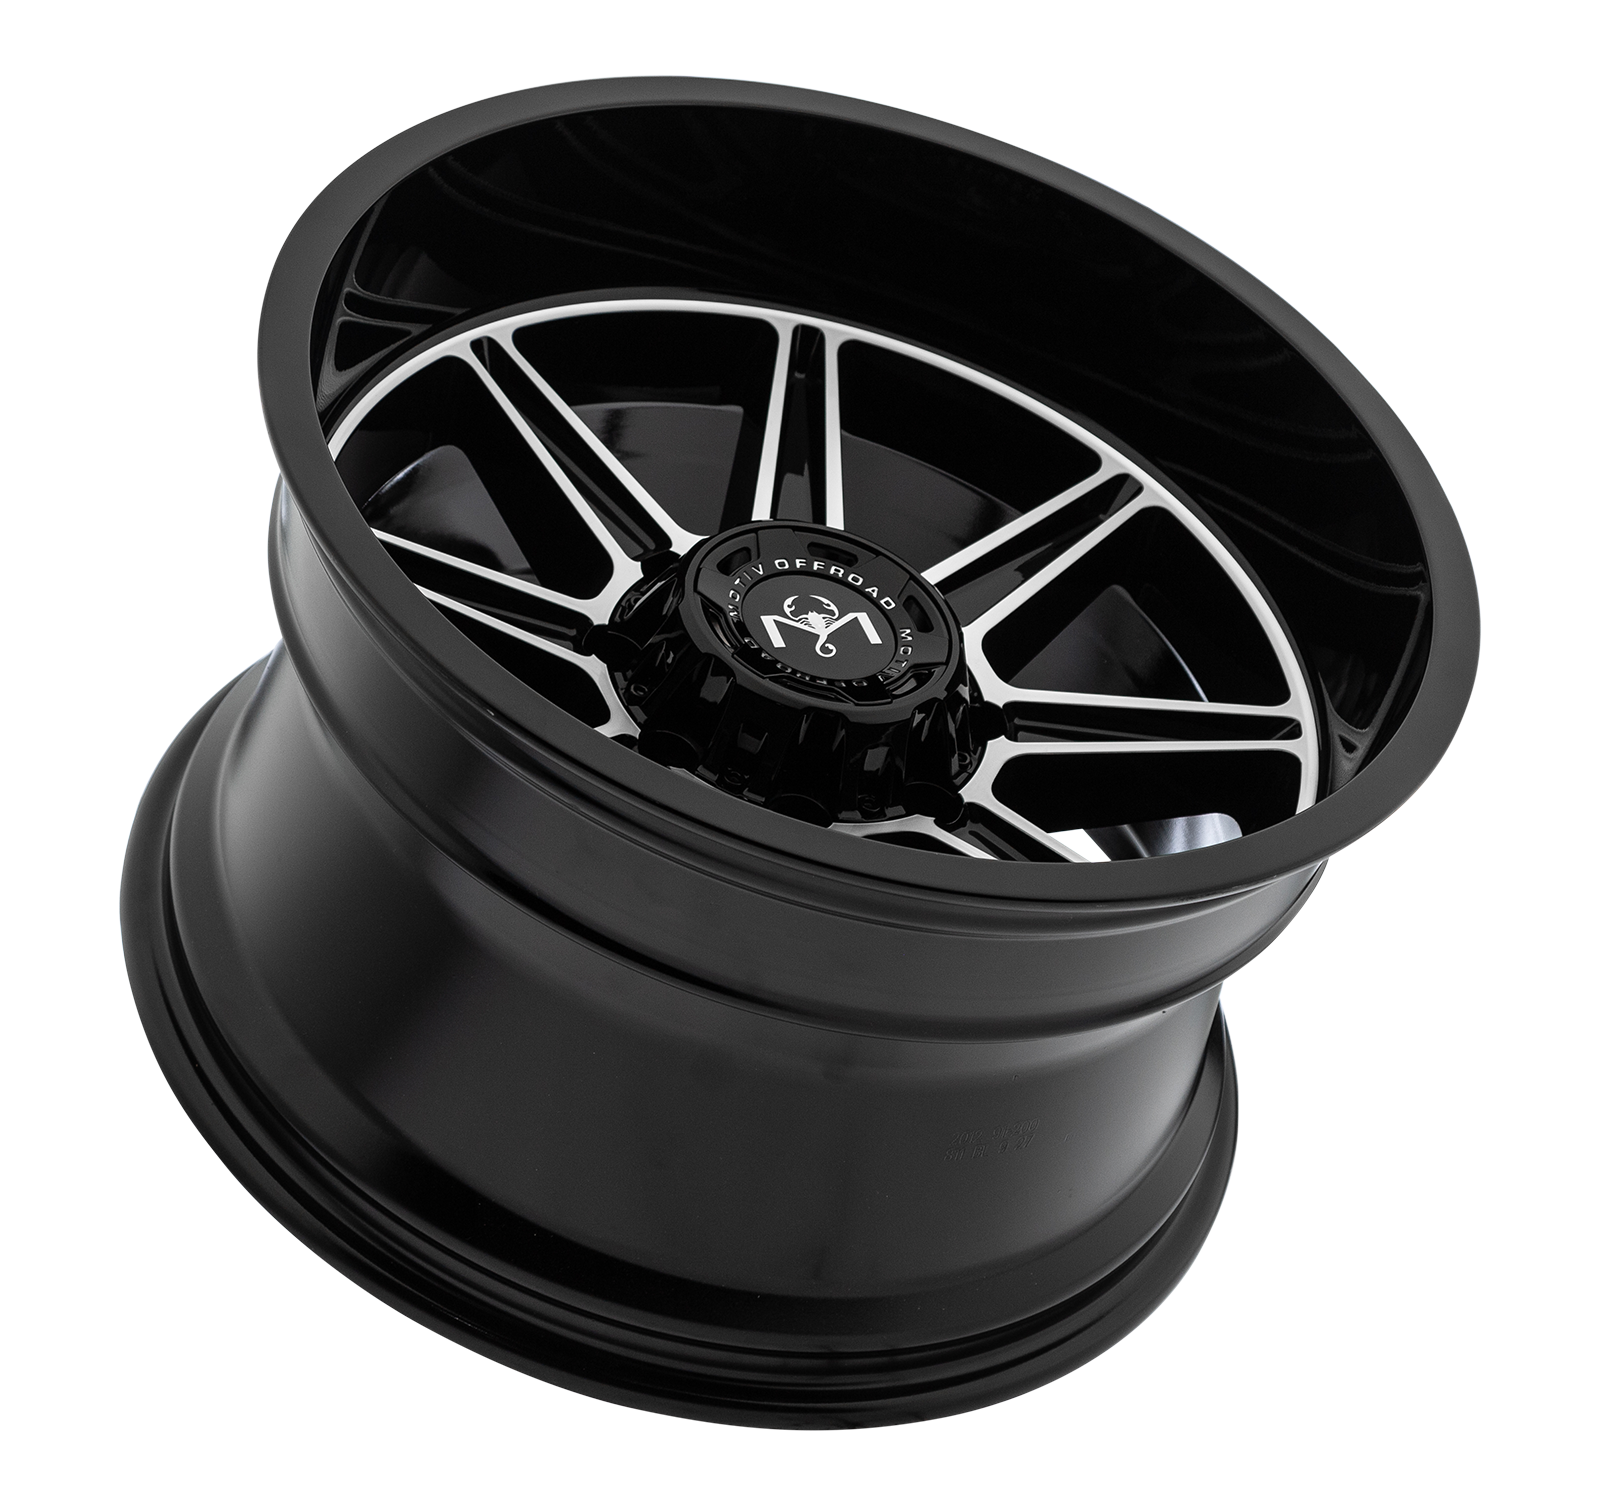 Motiv Off Road BALAST 20X12 -44 8X6.50 Gloss Black With Machined Face Accents